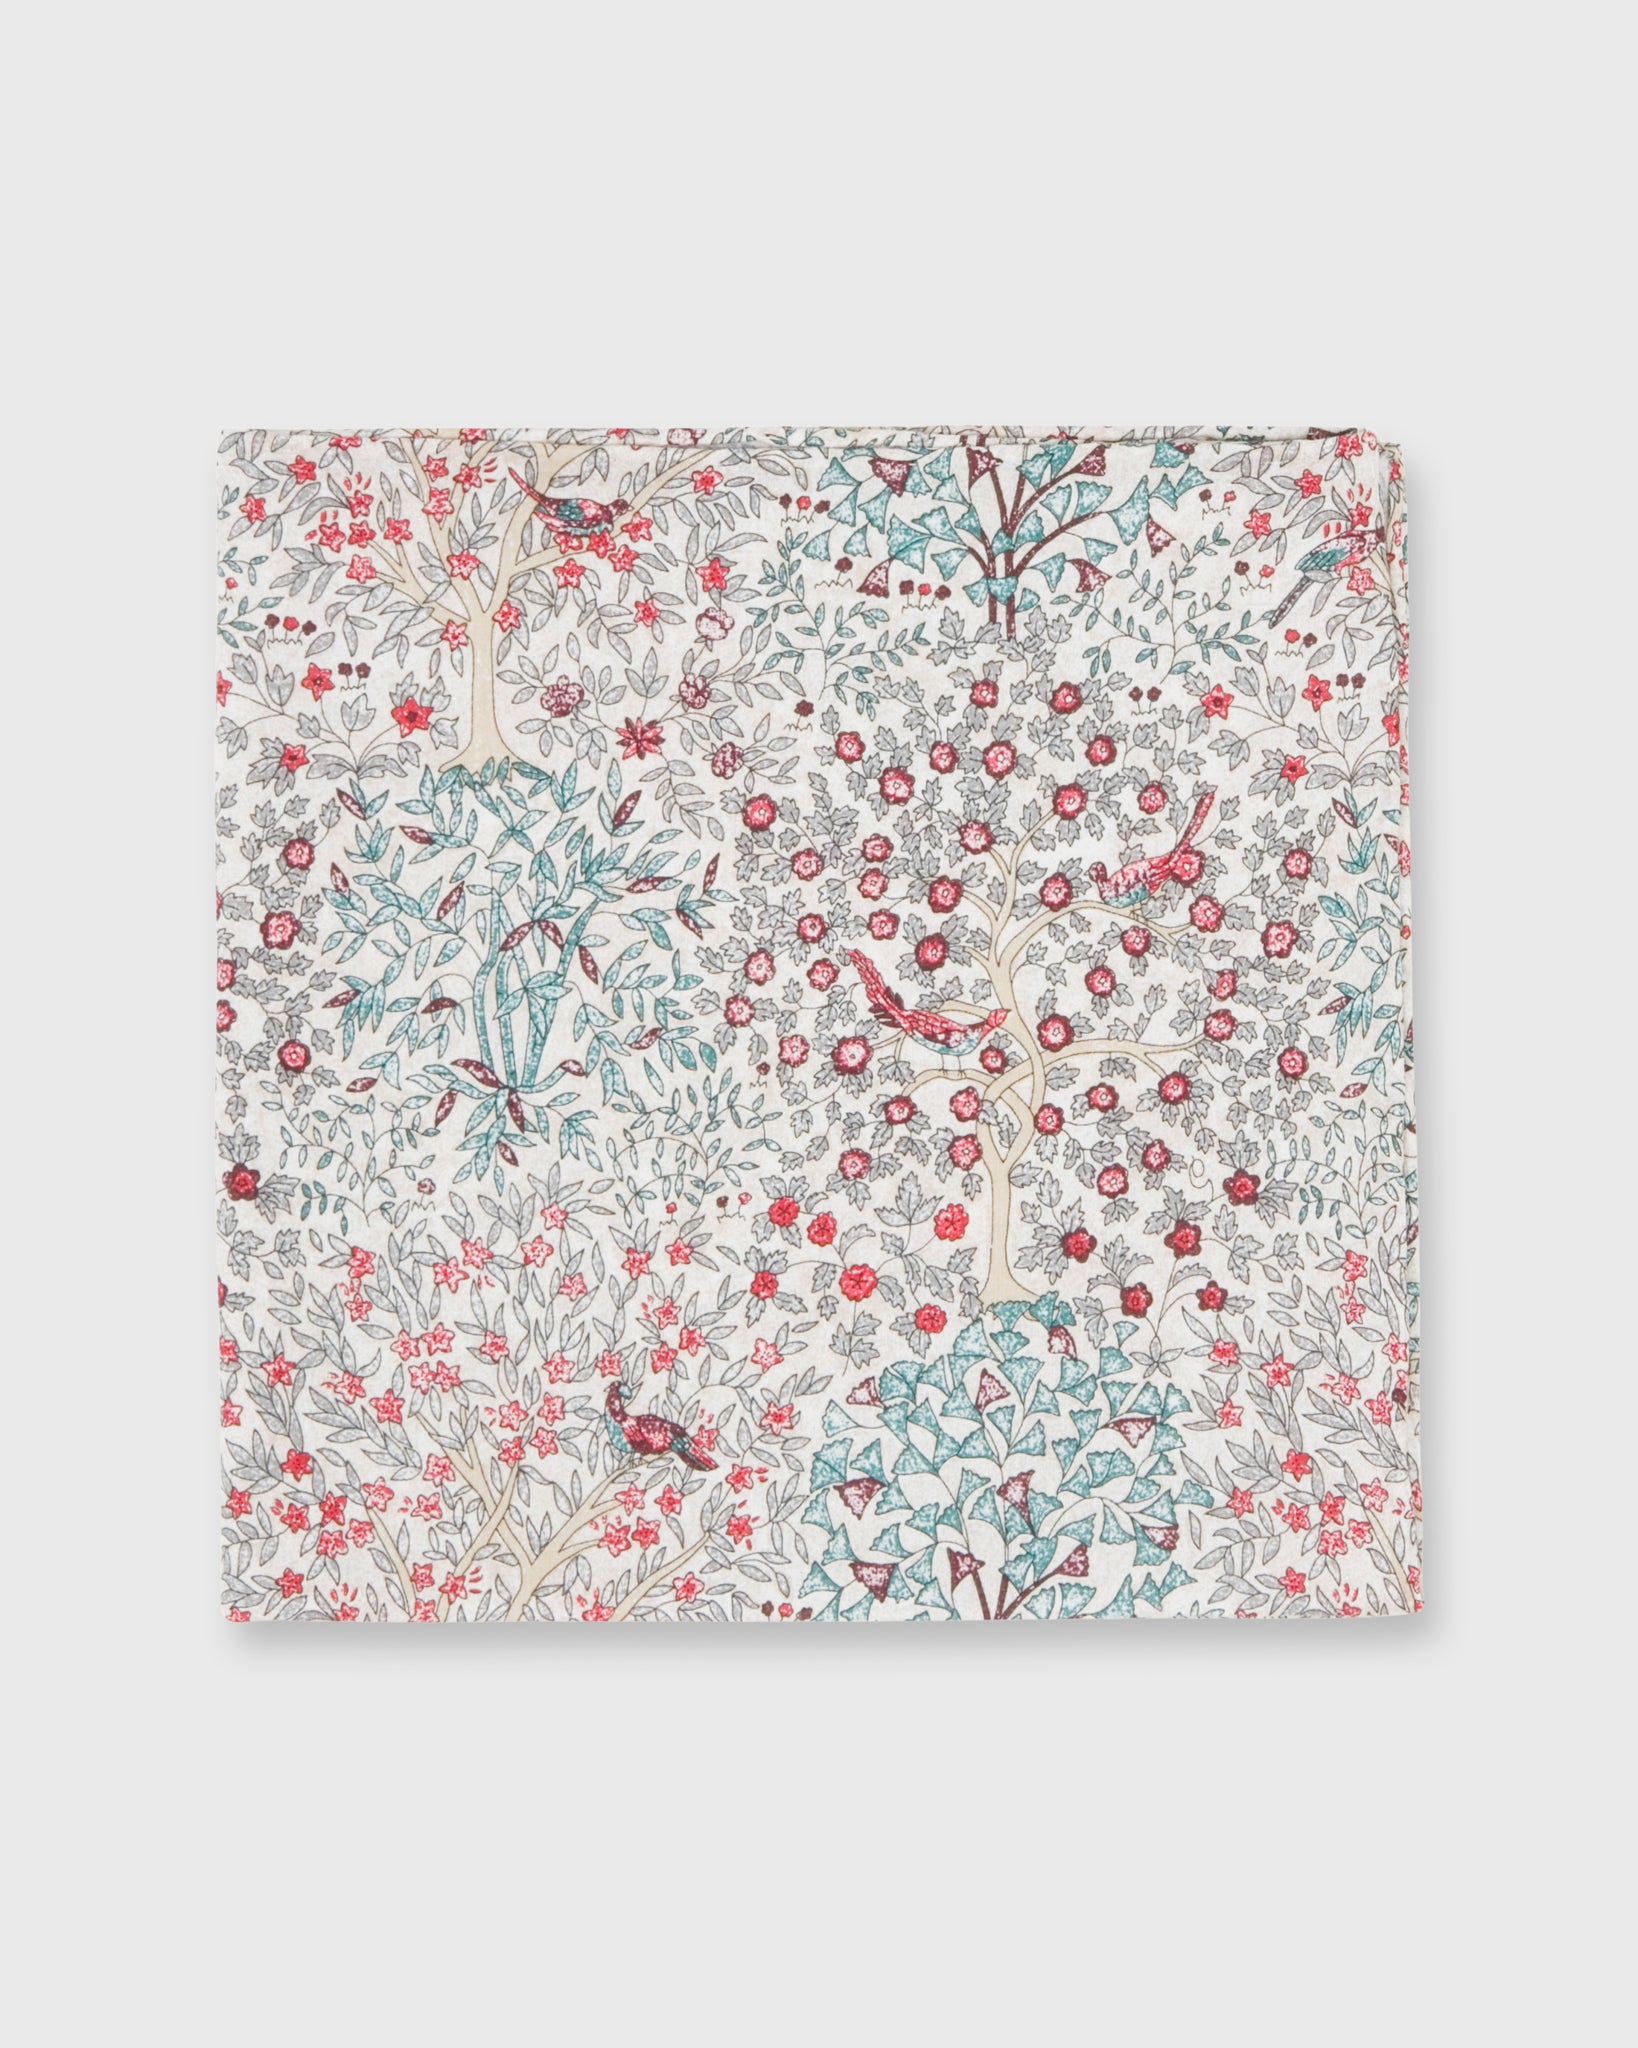 Cotton Print Pocket Square in Red/Green Jesse & Jean Liberty Fabric